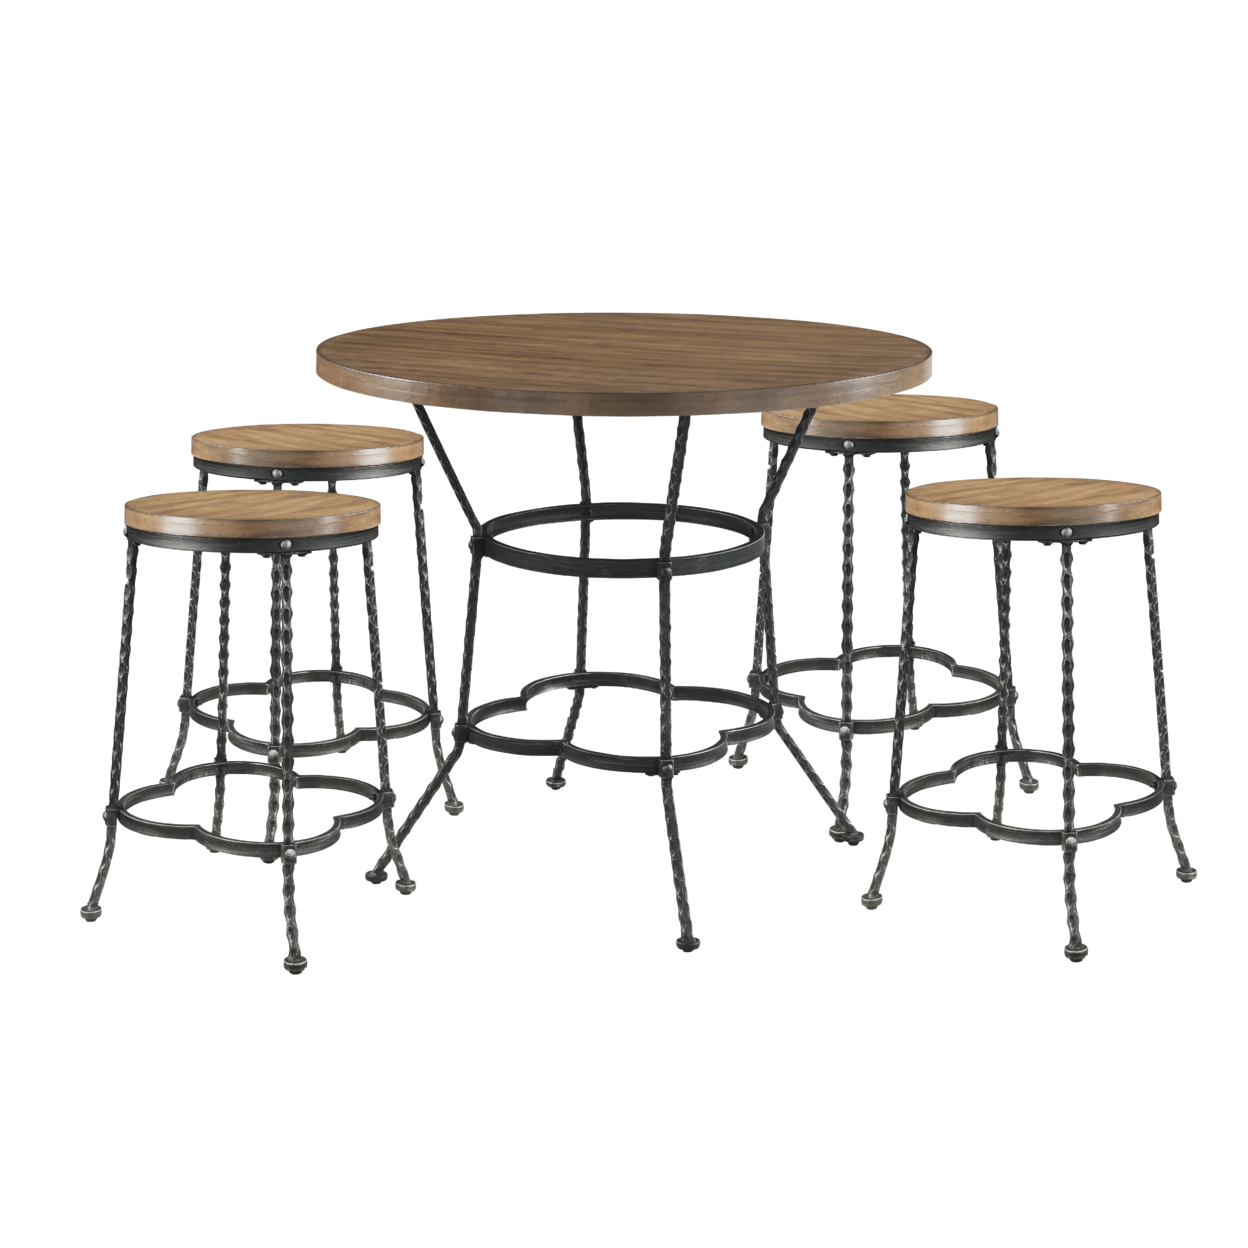 5 Piece Counter Height Set With 1 Table And 4 Stools, Brown And Black- Saltoro Sherpi